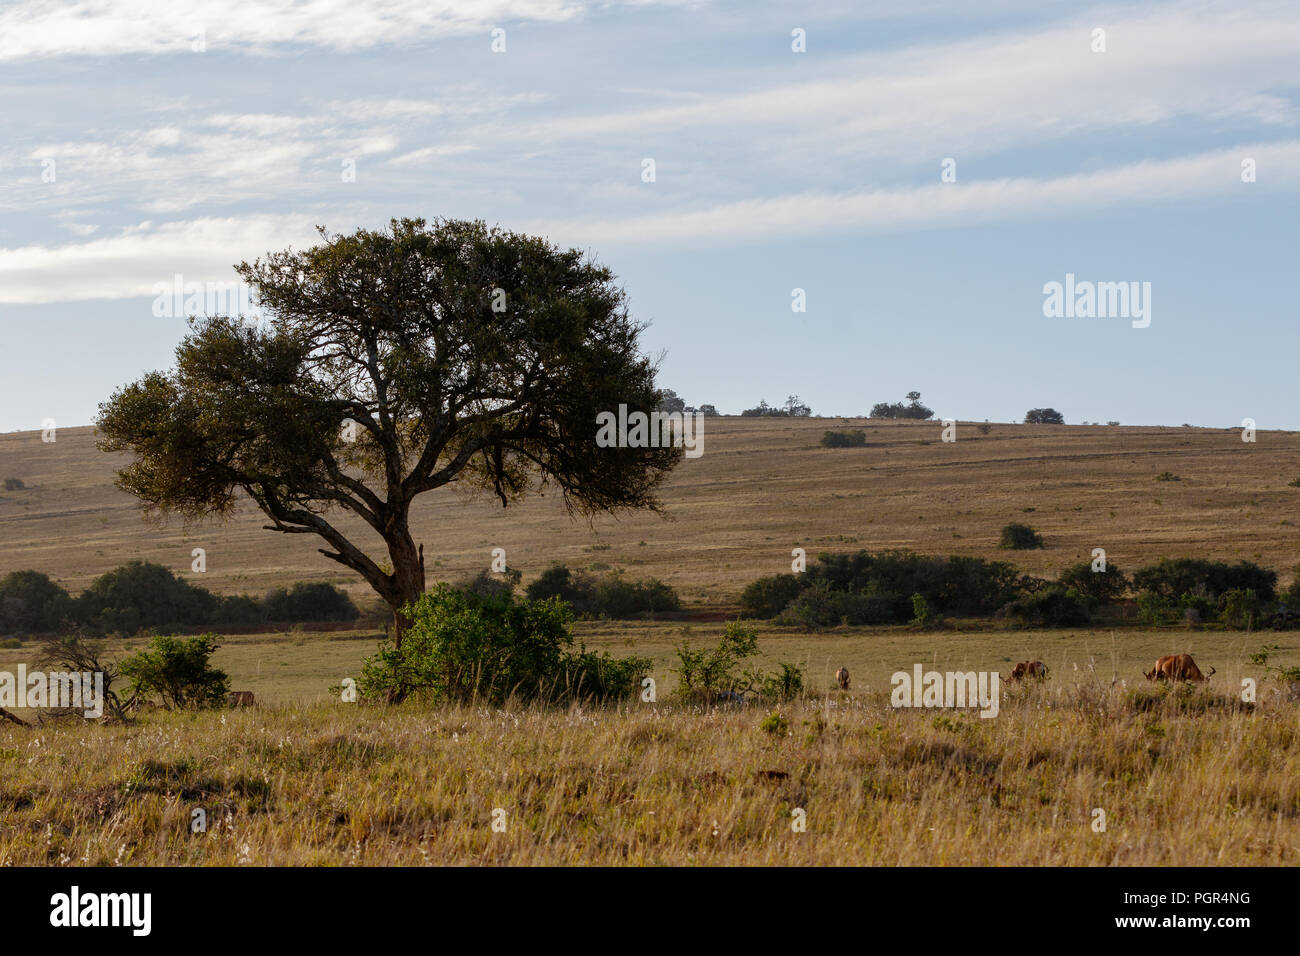 The Landscape of trees and wild animals in the field Stock Photo